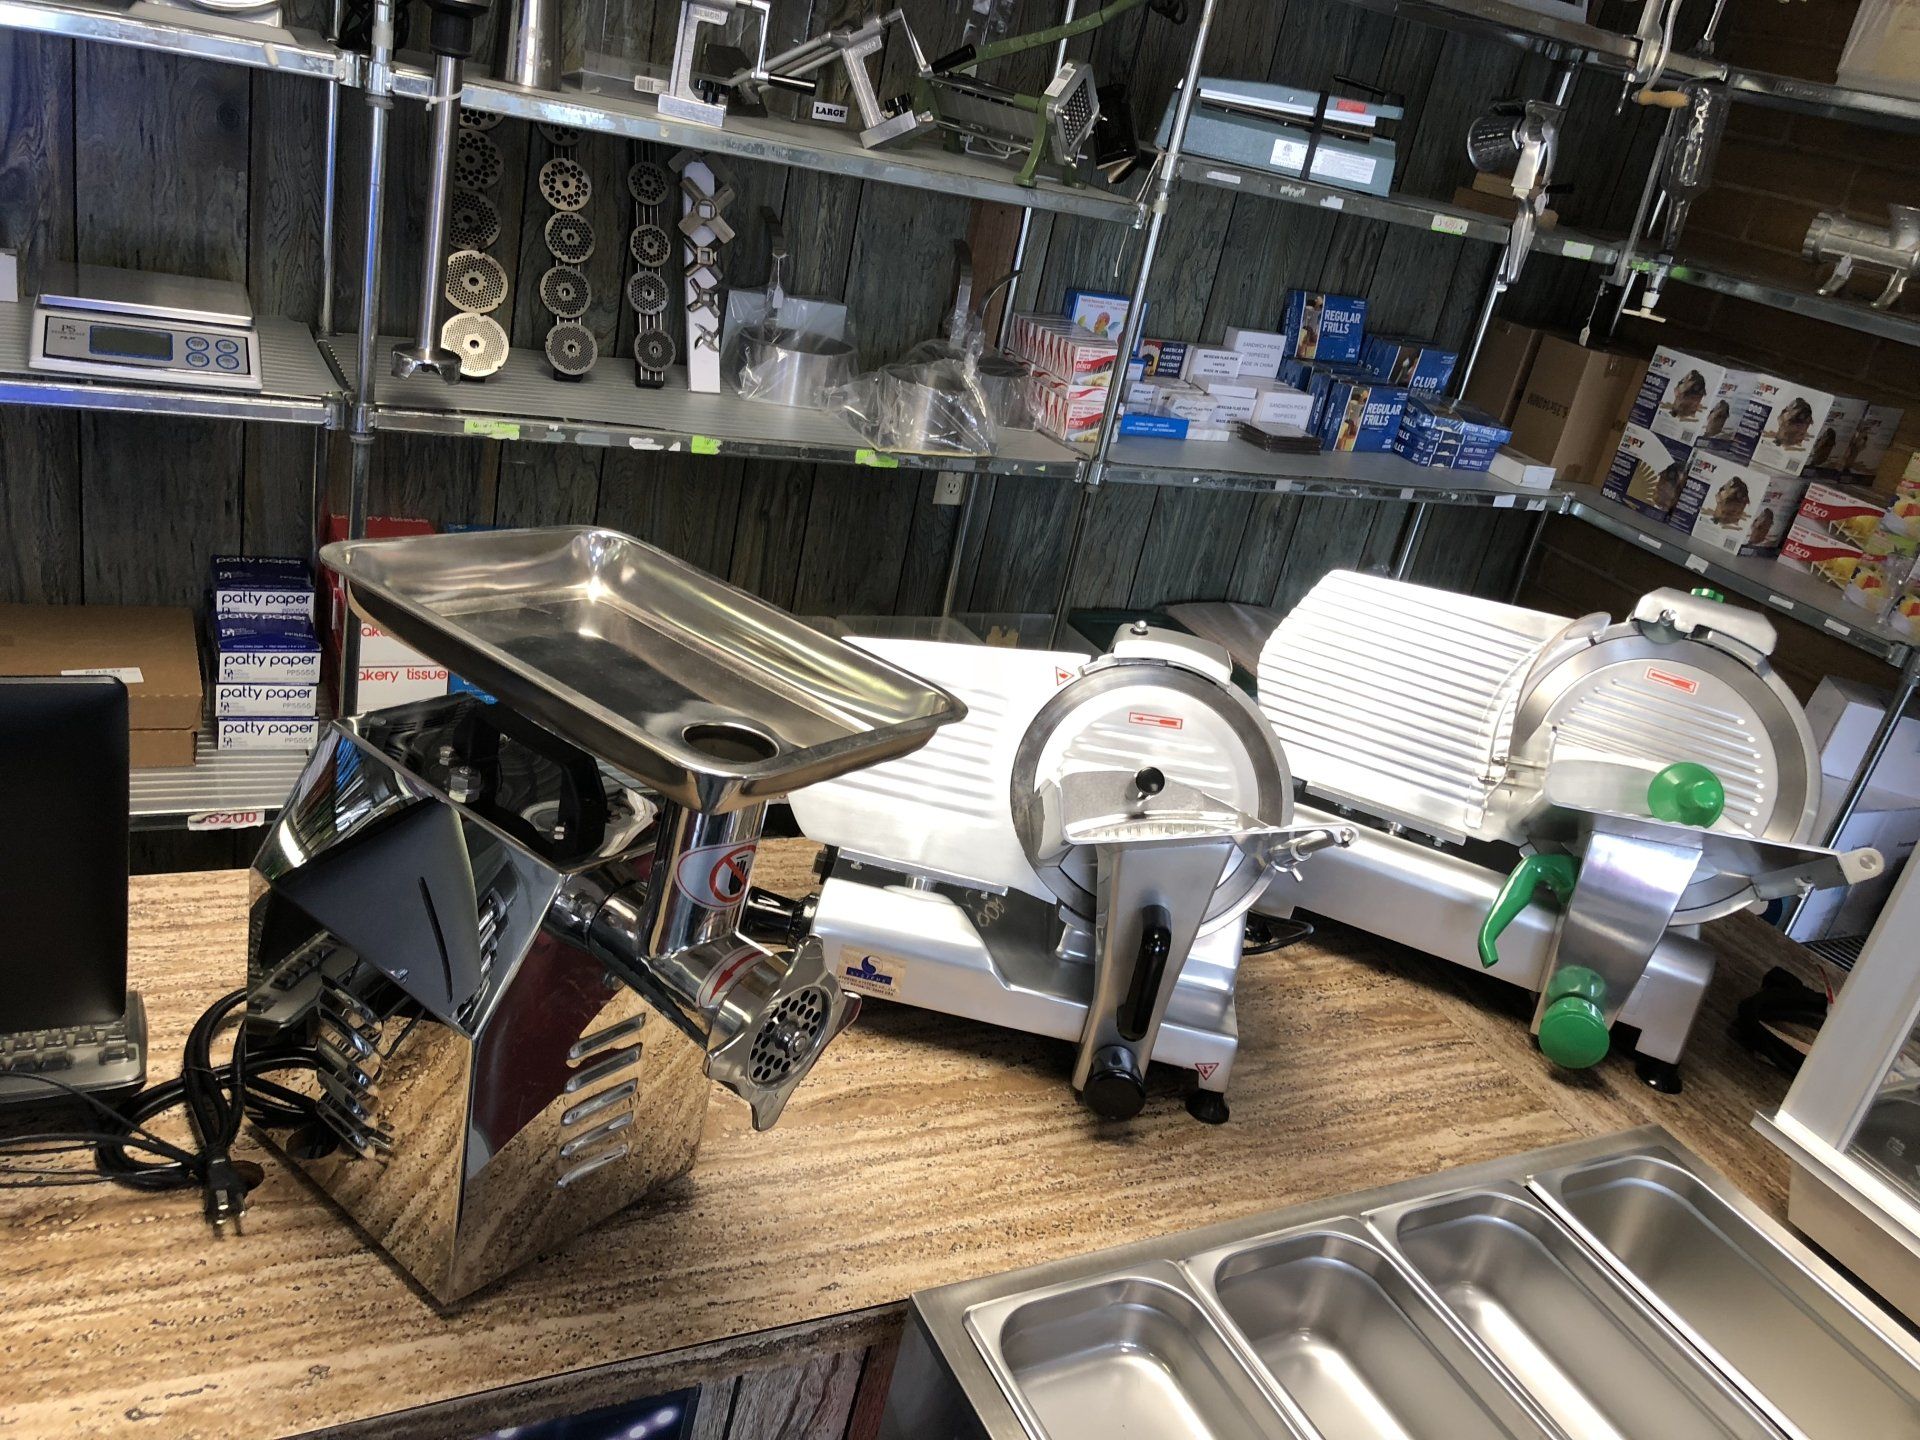 A meat grinder and a meat slicer are sitting on a counter in a store.